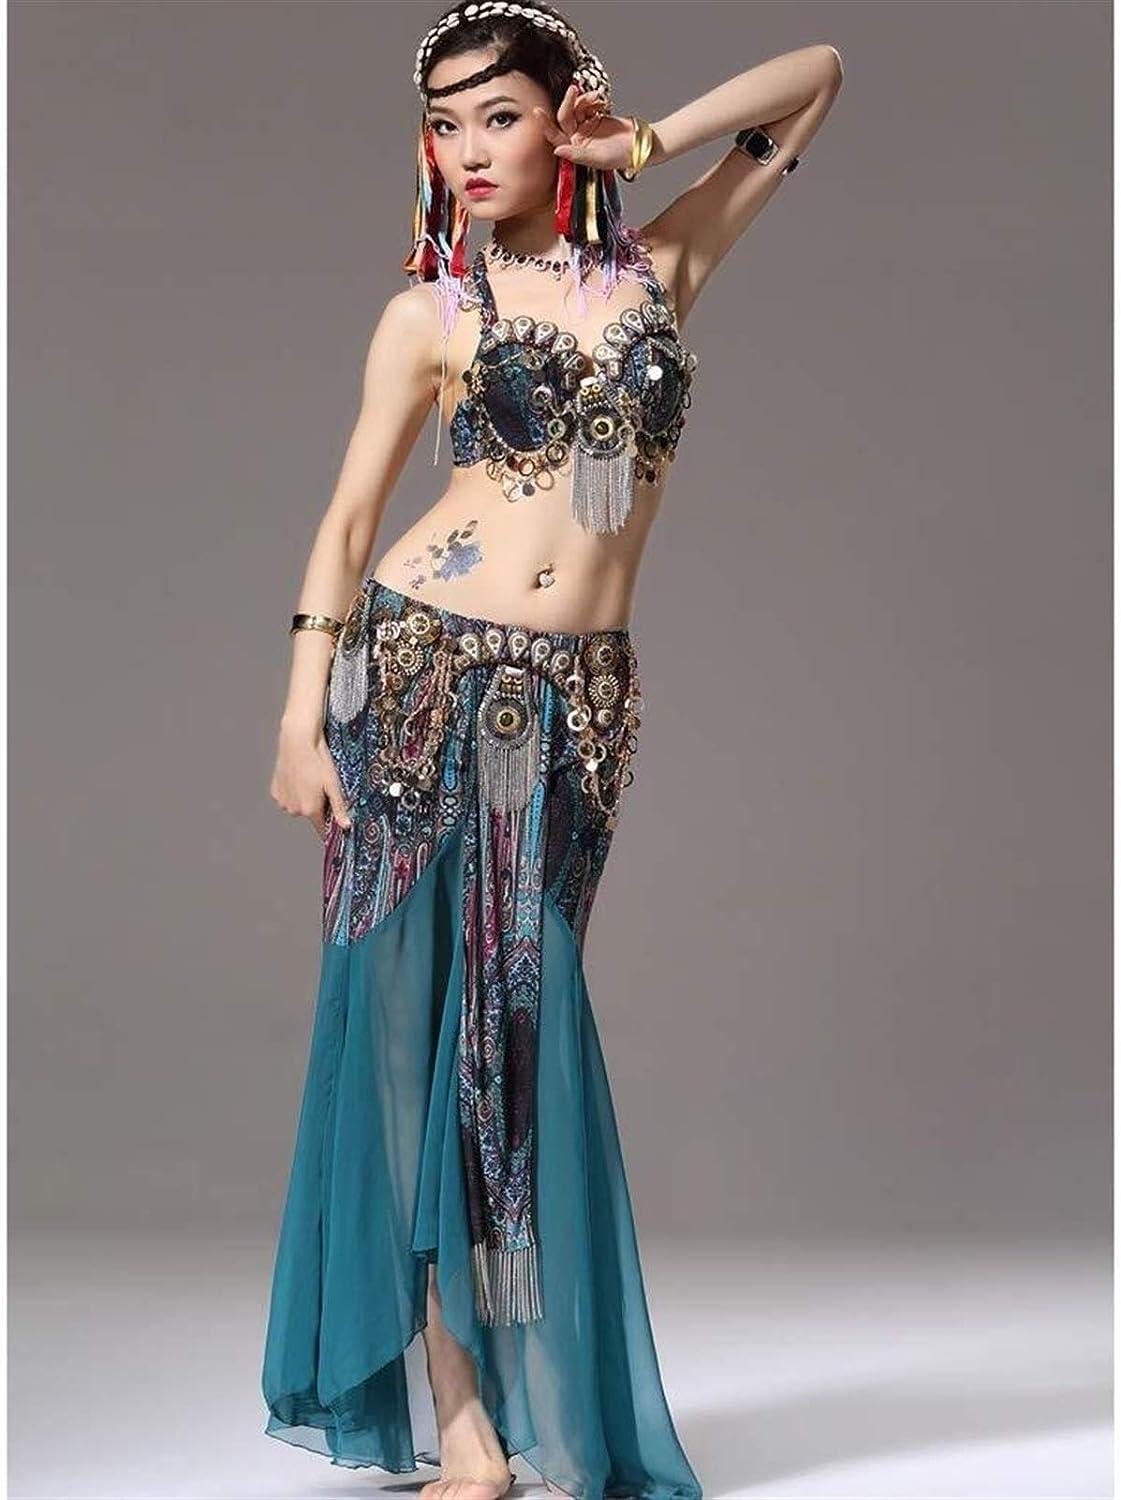 Belly Dancing Outfit, B Dance Practice Dress, Skirt Belly Dance